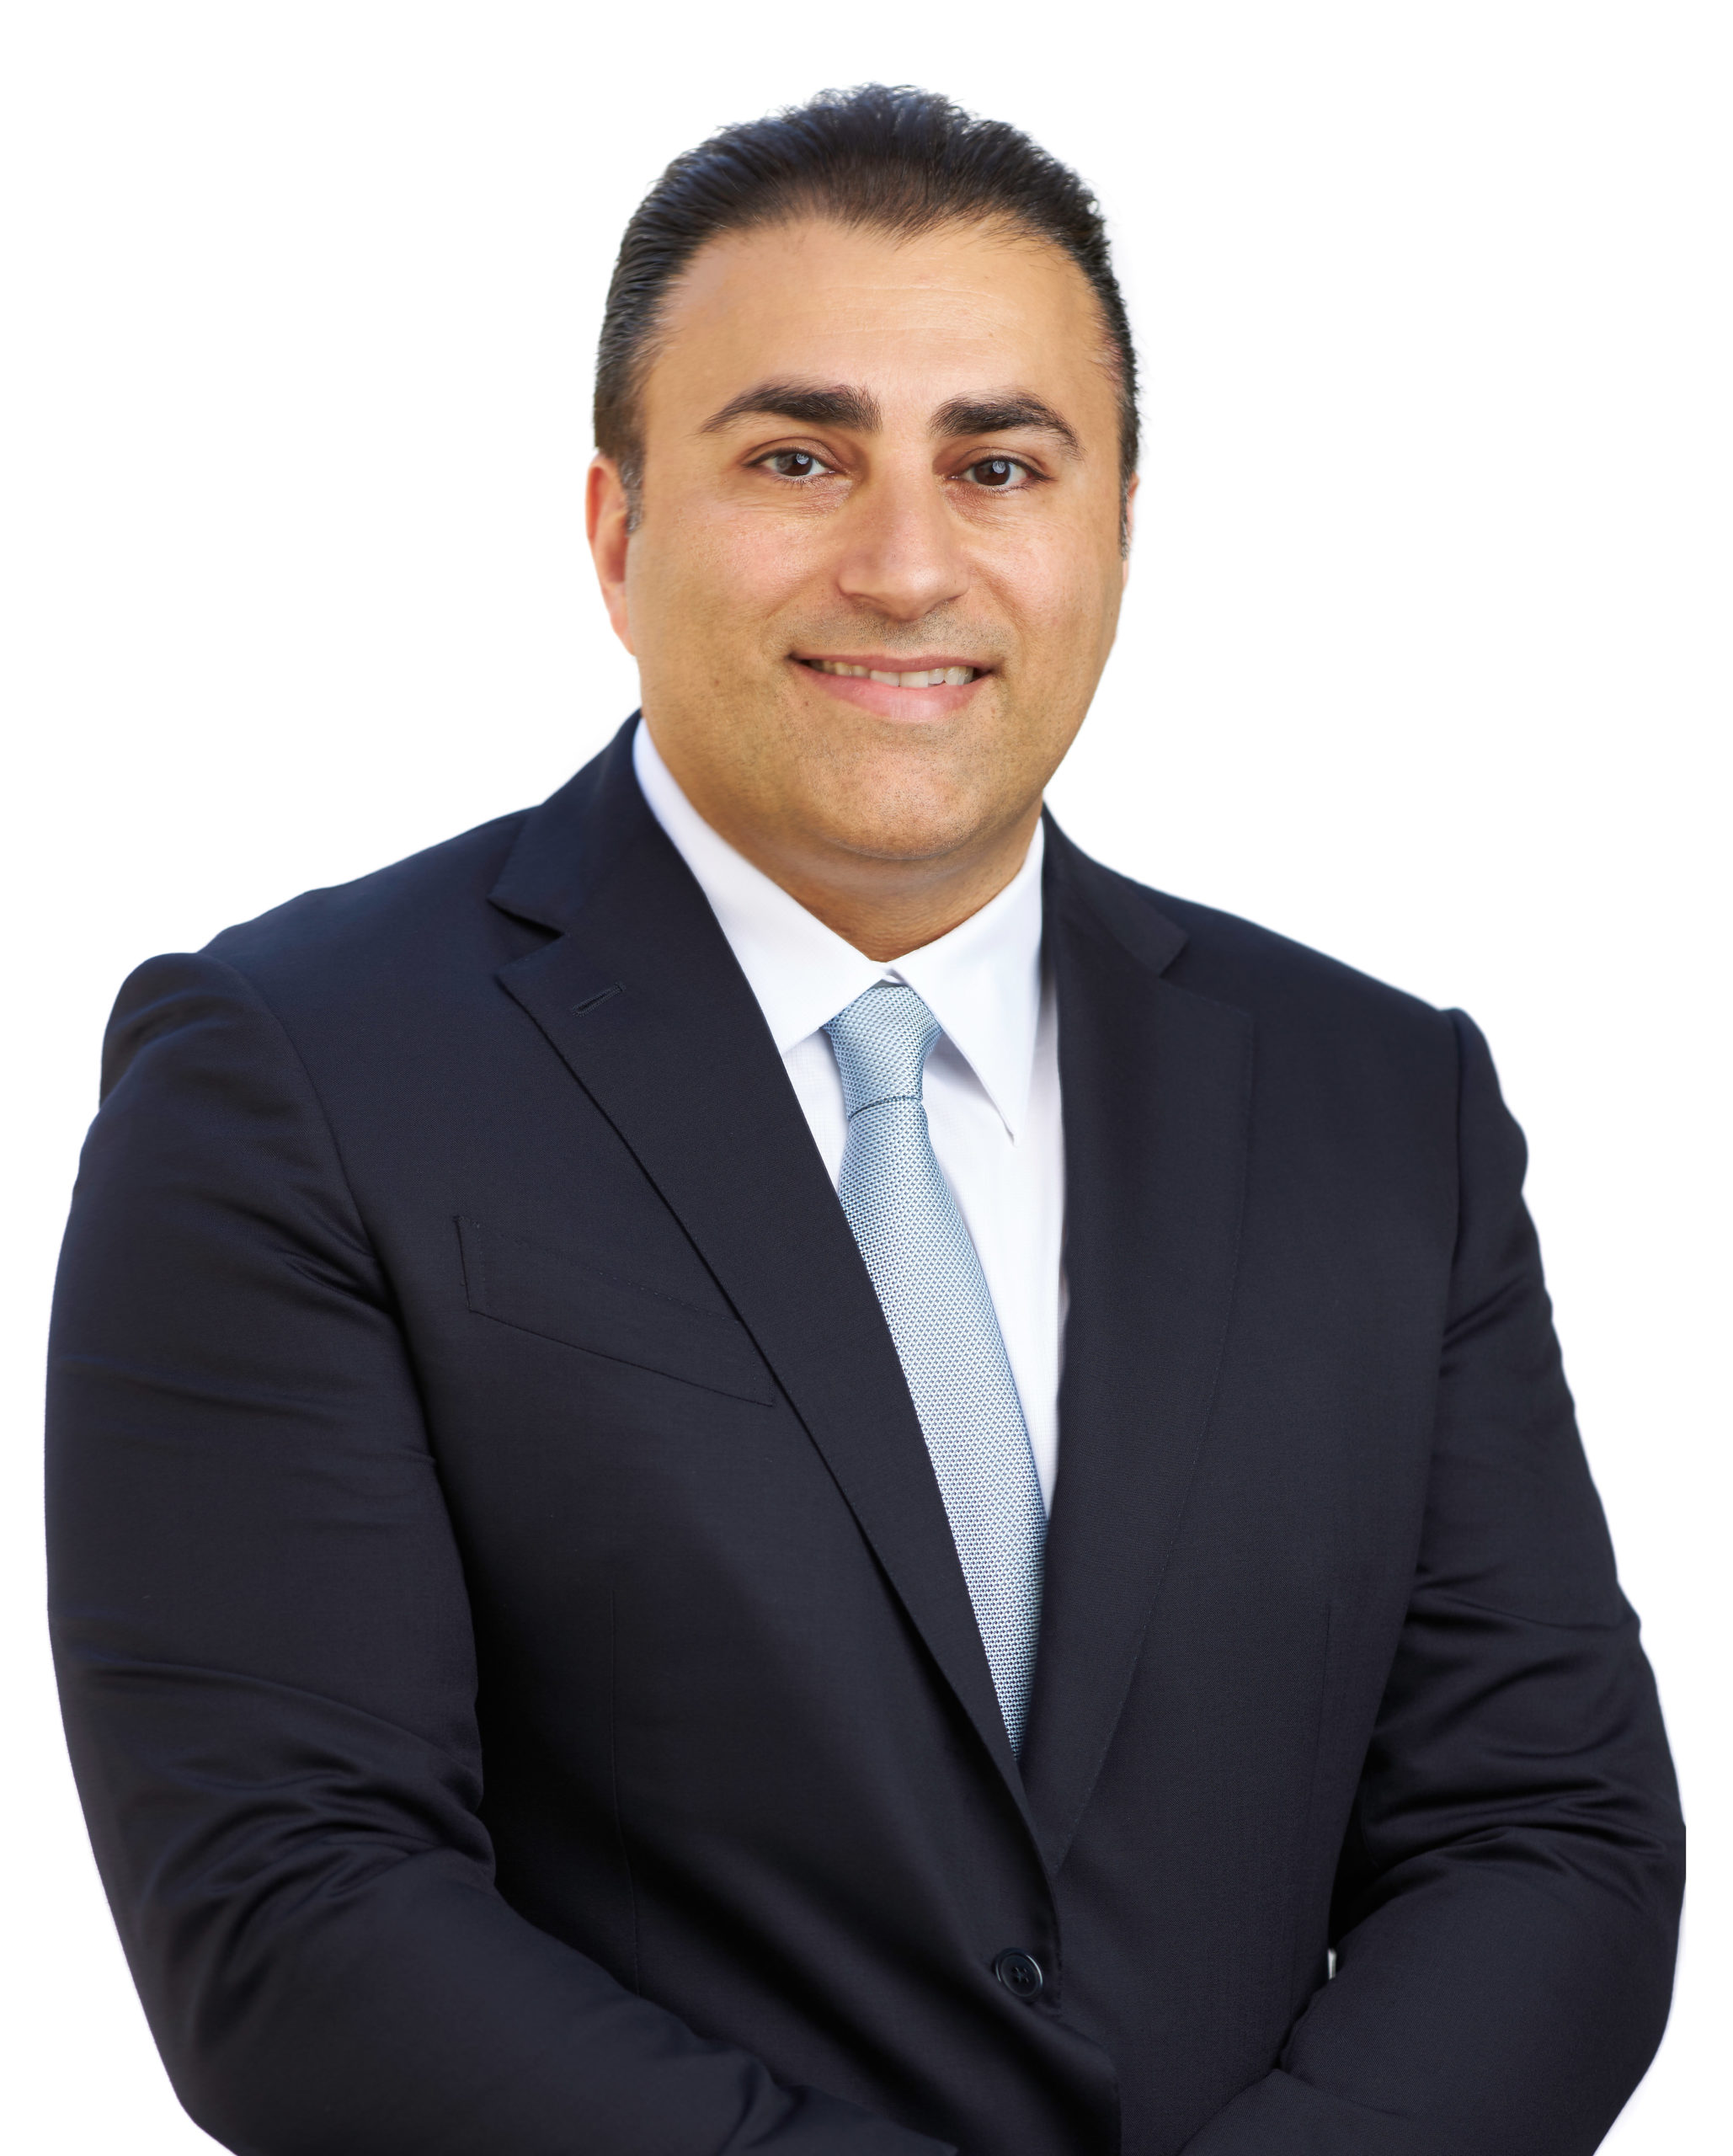 Steven Elia, Shareholder and Personal Injury Attorney in San Diego